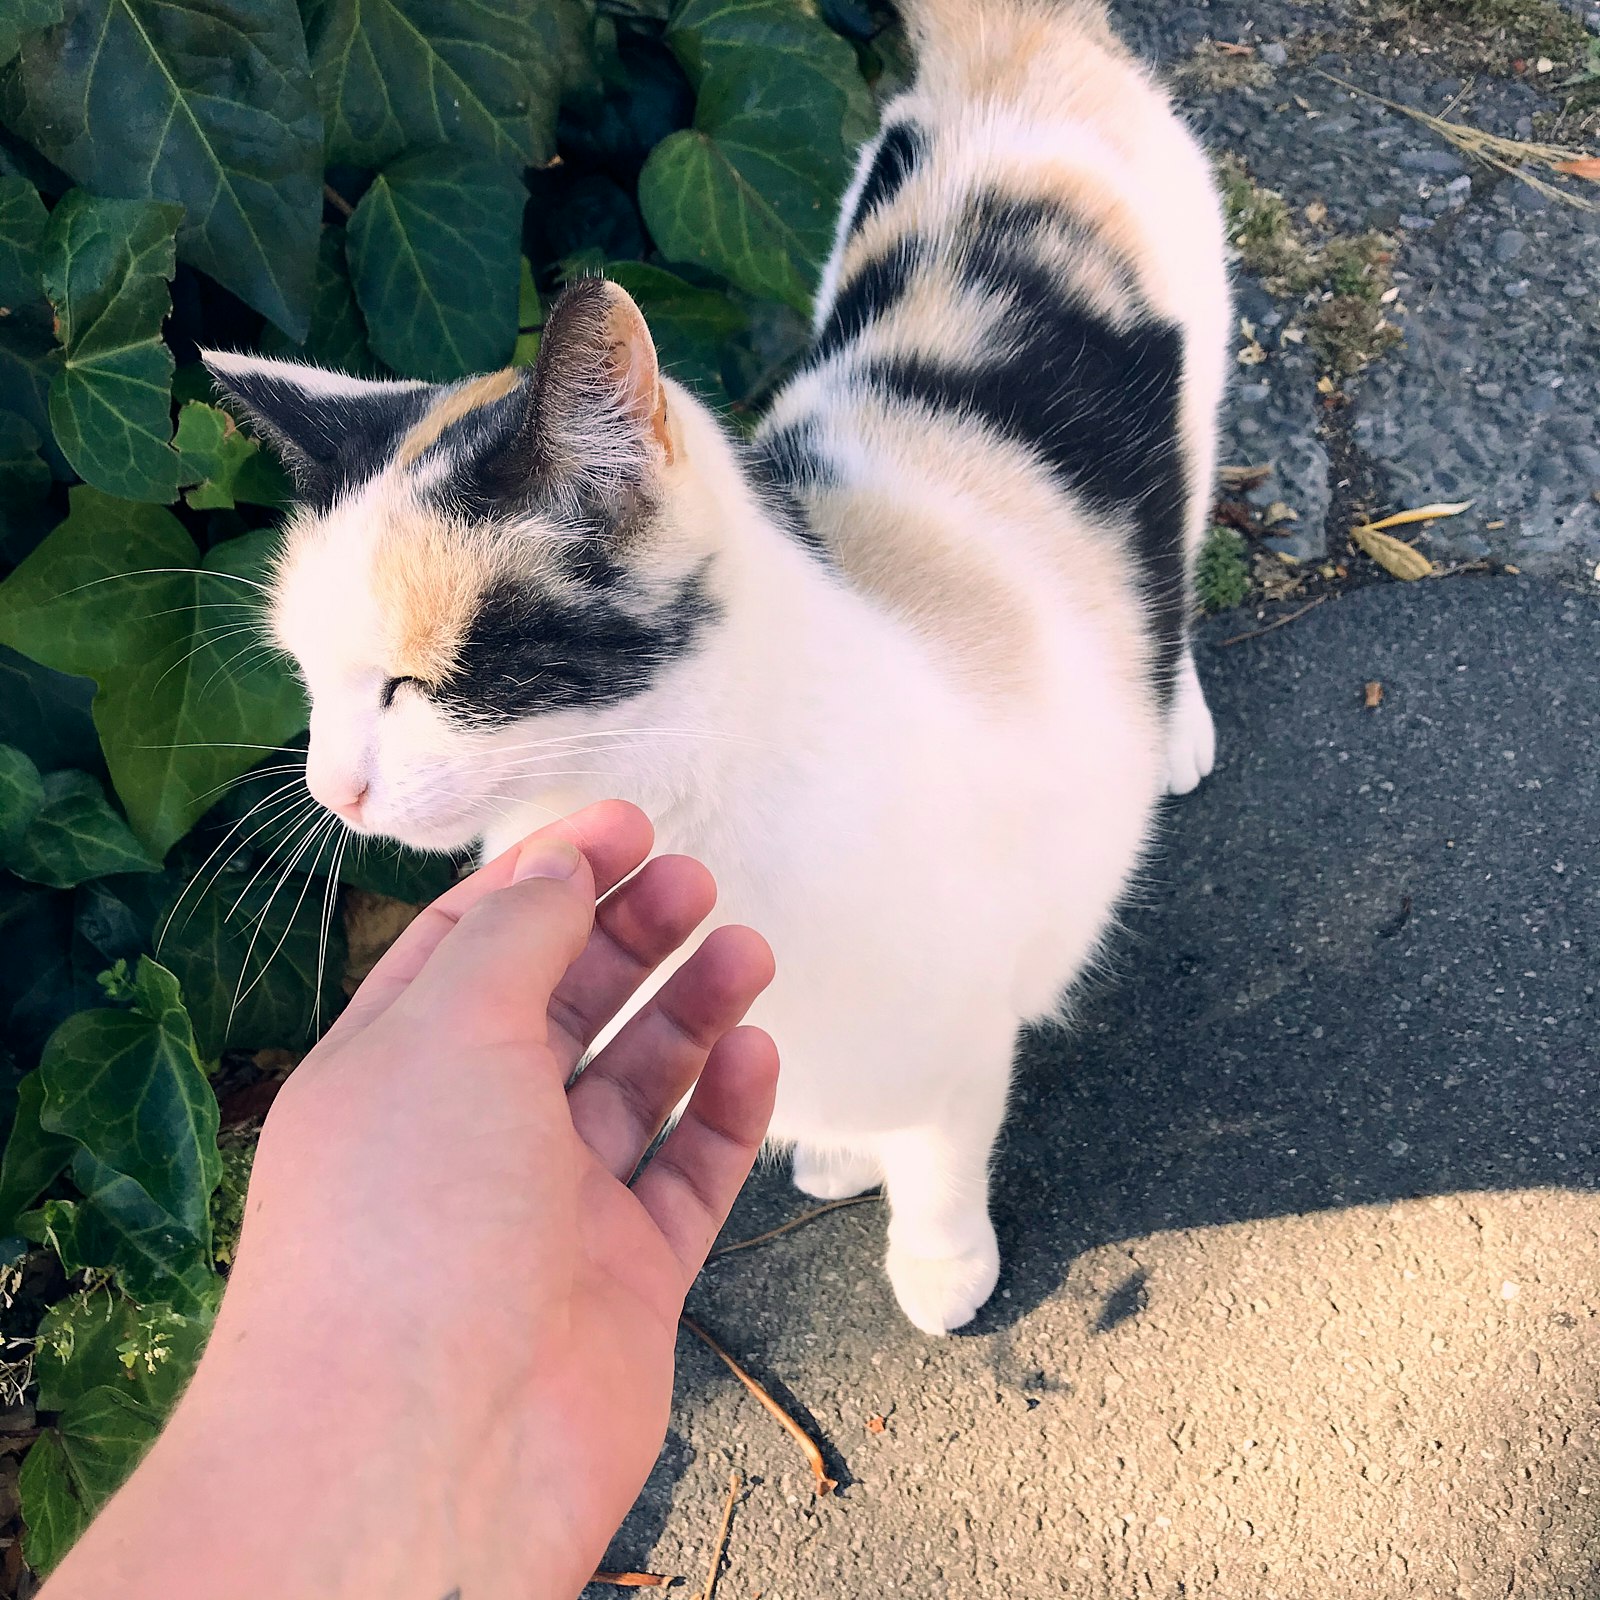 A hand petting a cat on the street